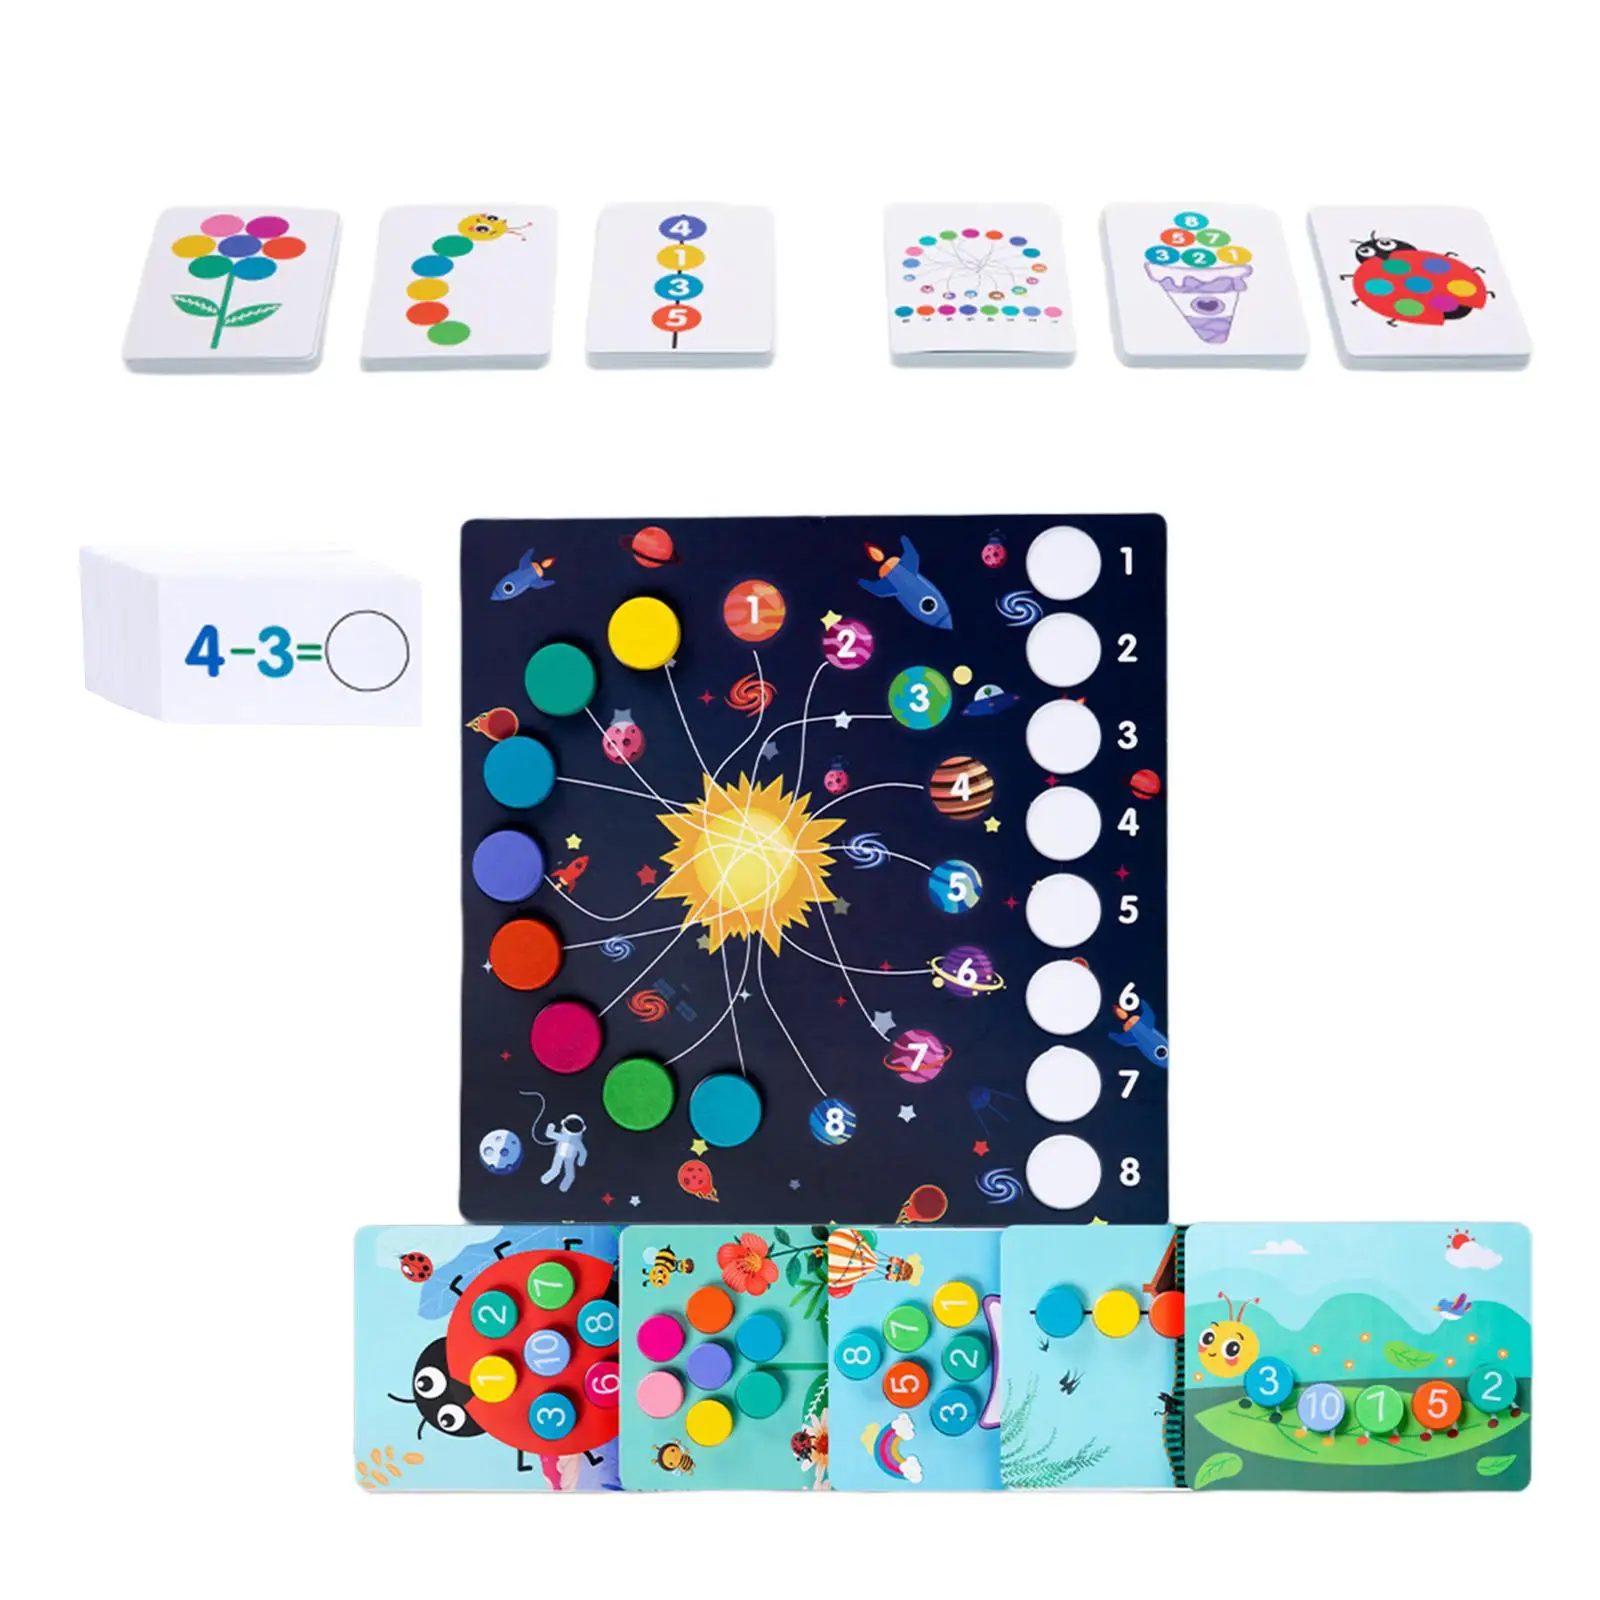 Toddler Number Puzzles Wood Hand on ability for Game Kindergarten Home Decor